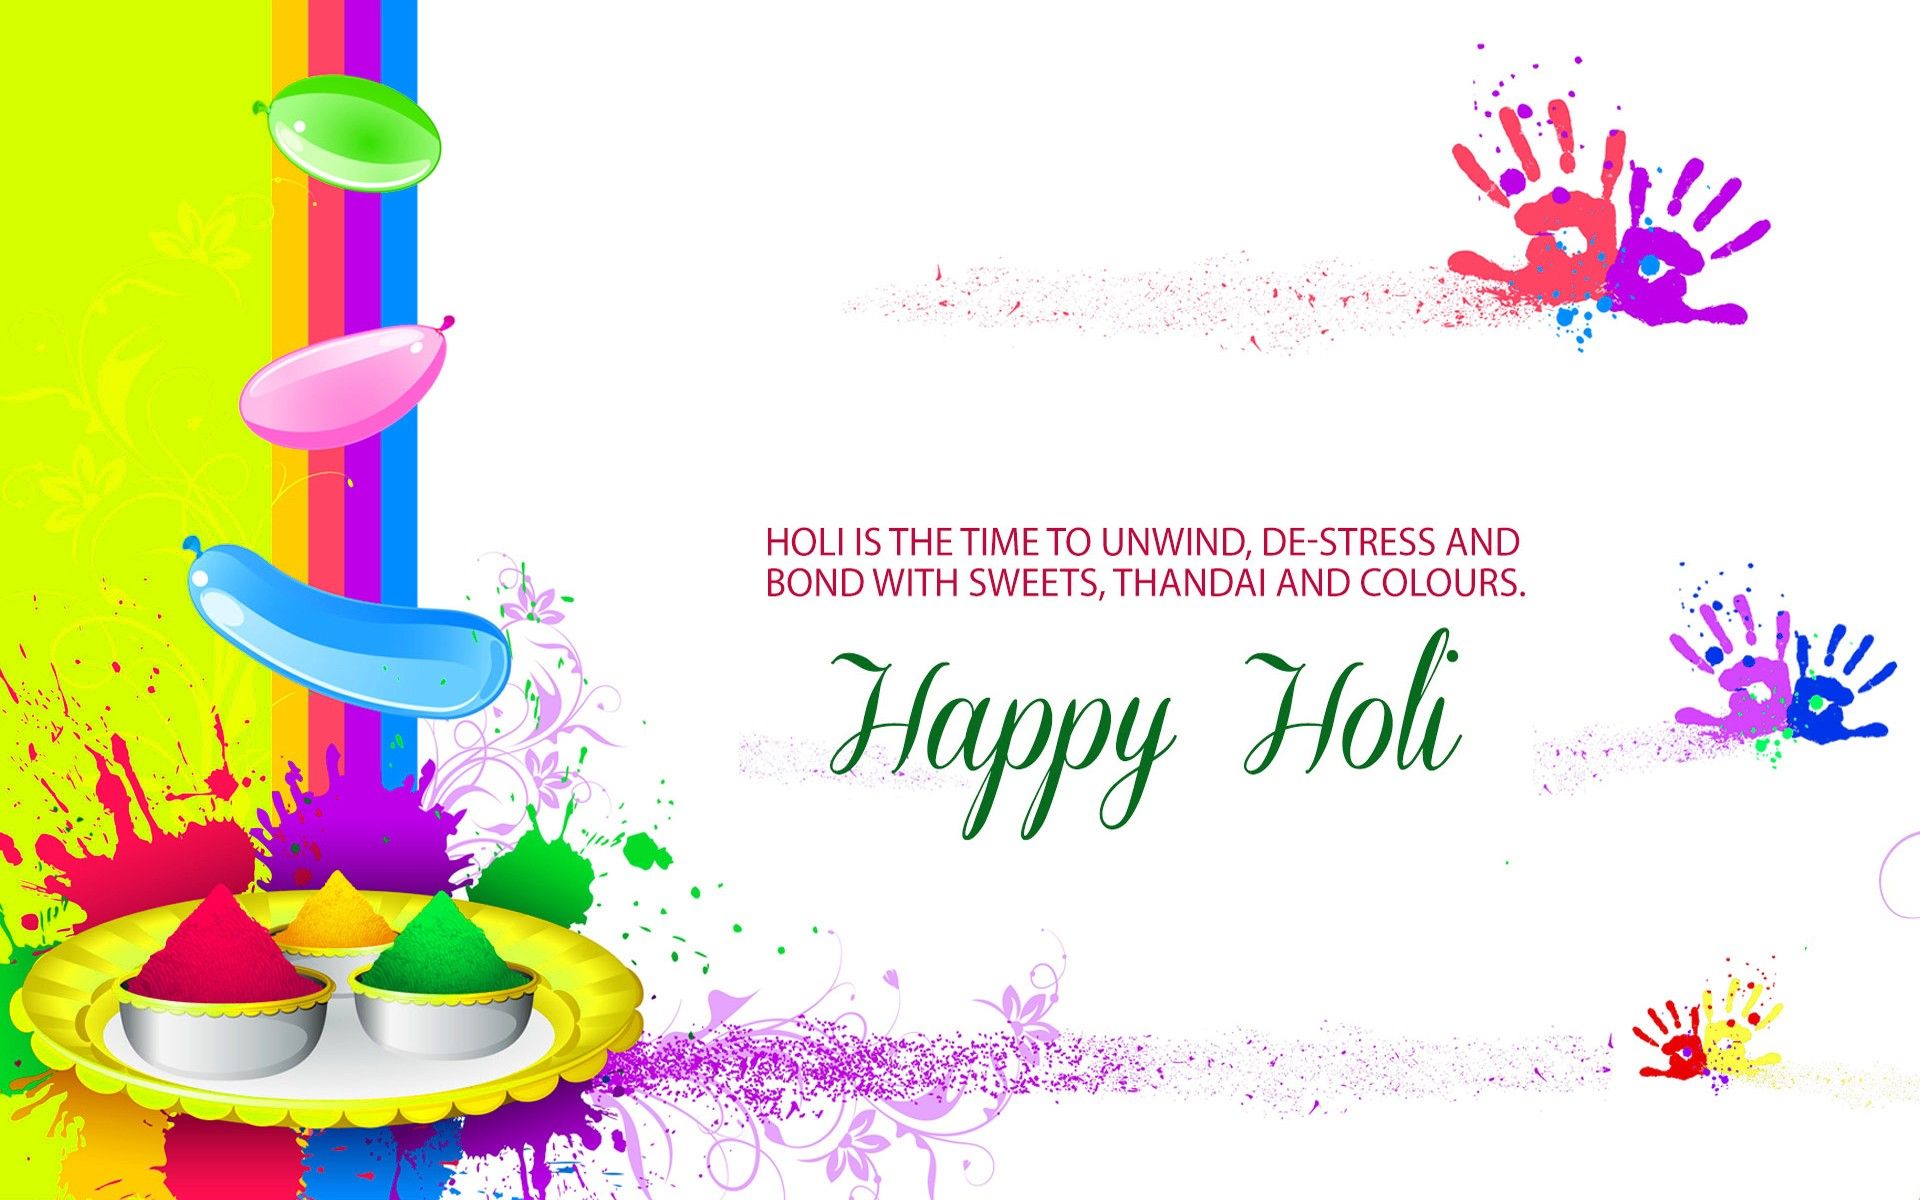 Wonderful Happy Holi Image, Picture, Wallpaper, Pics to share to celebrate the Occasion